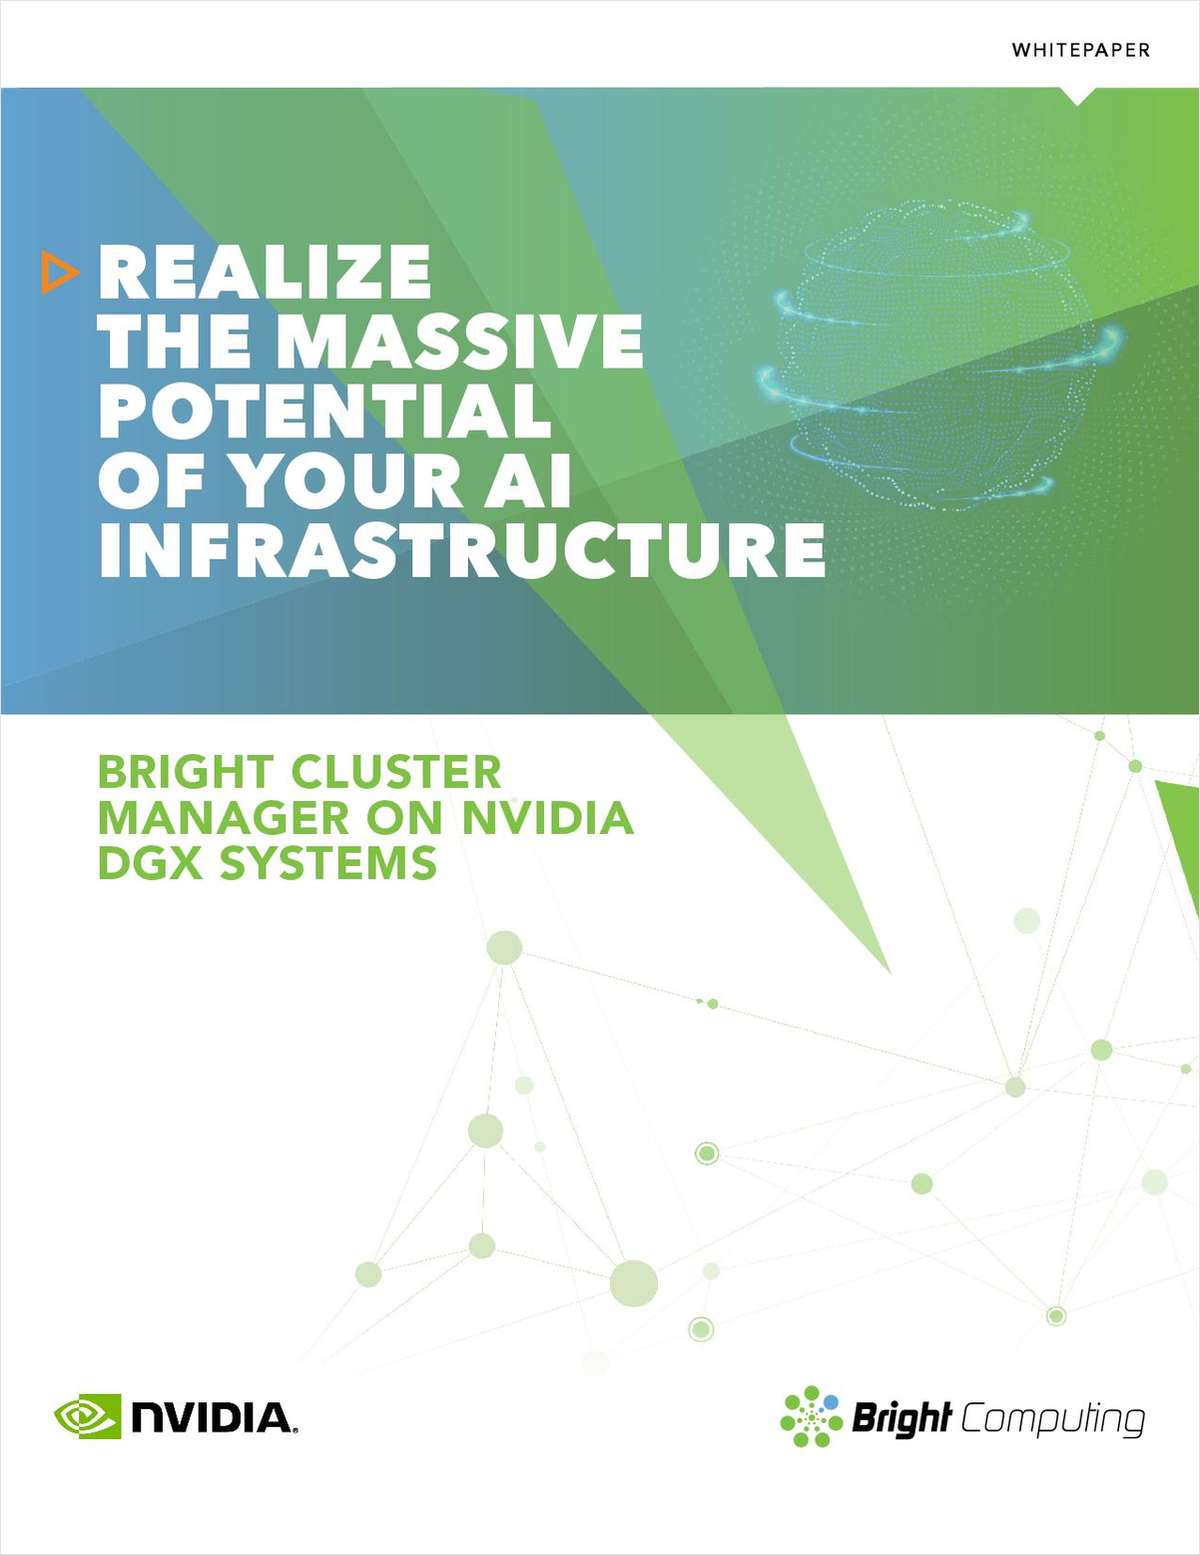 Realize the Massive Potential of Your AI Infrastructure with Bright Computing and NVIDIA